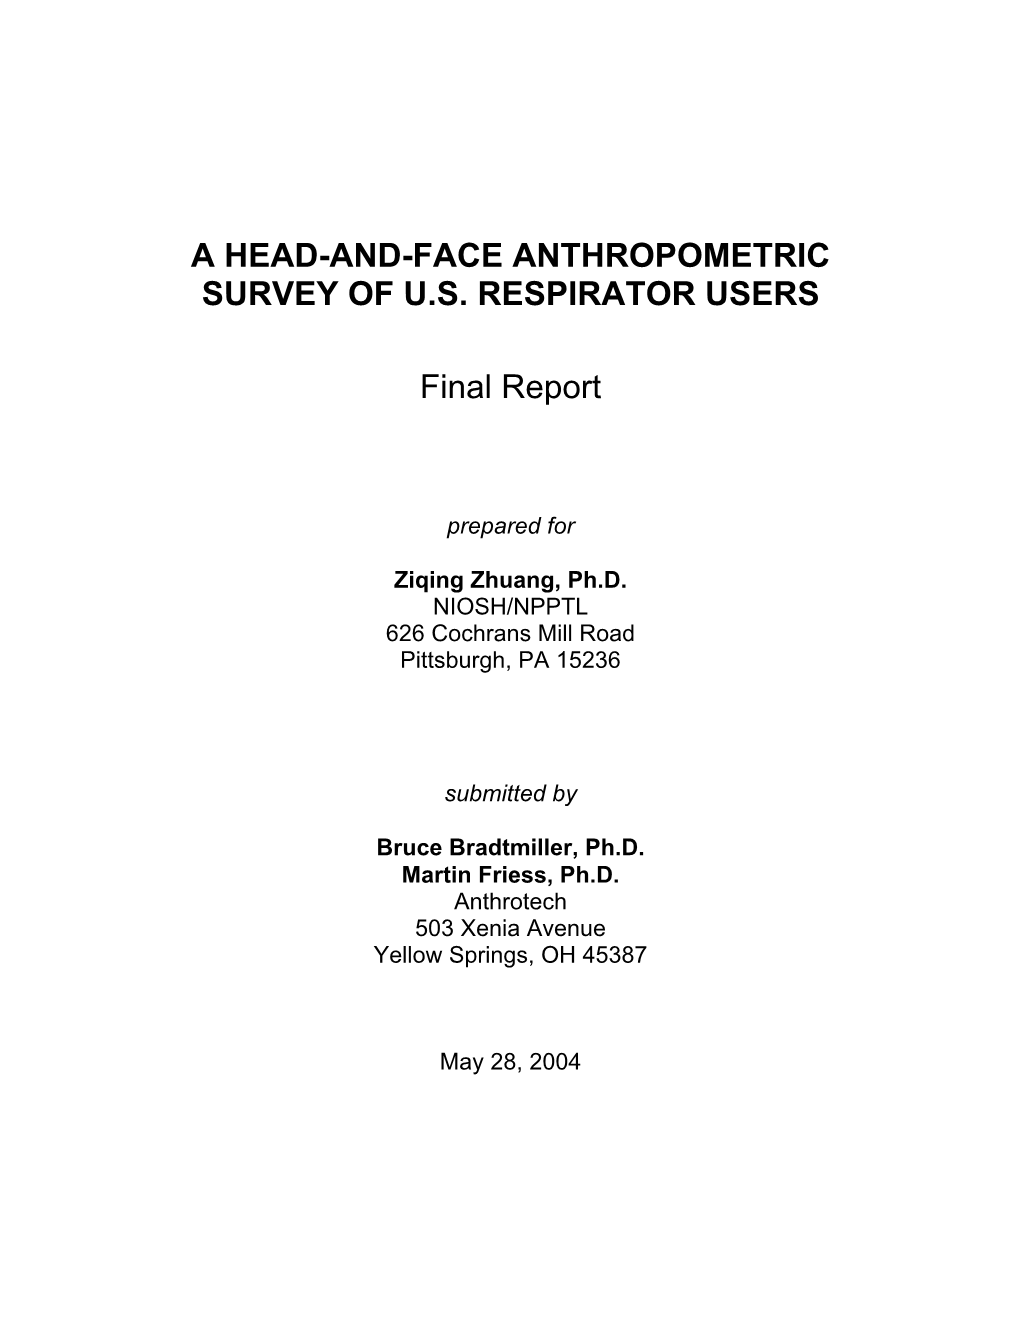 A Head-And-Face Anthropometric Survey of U.S